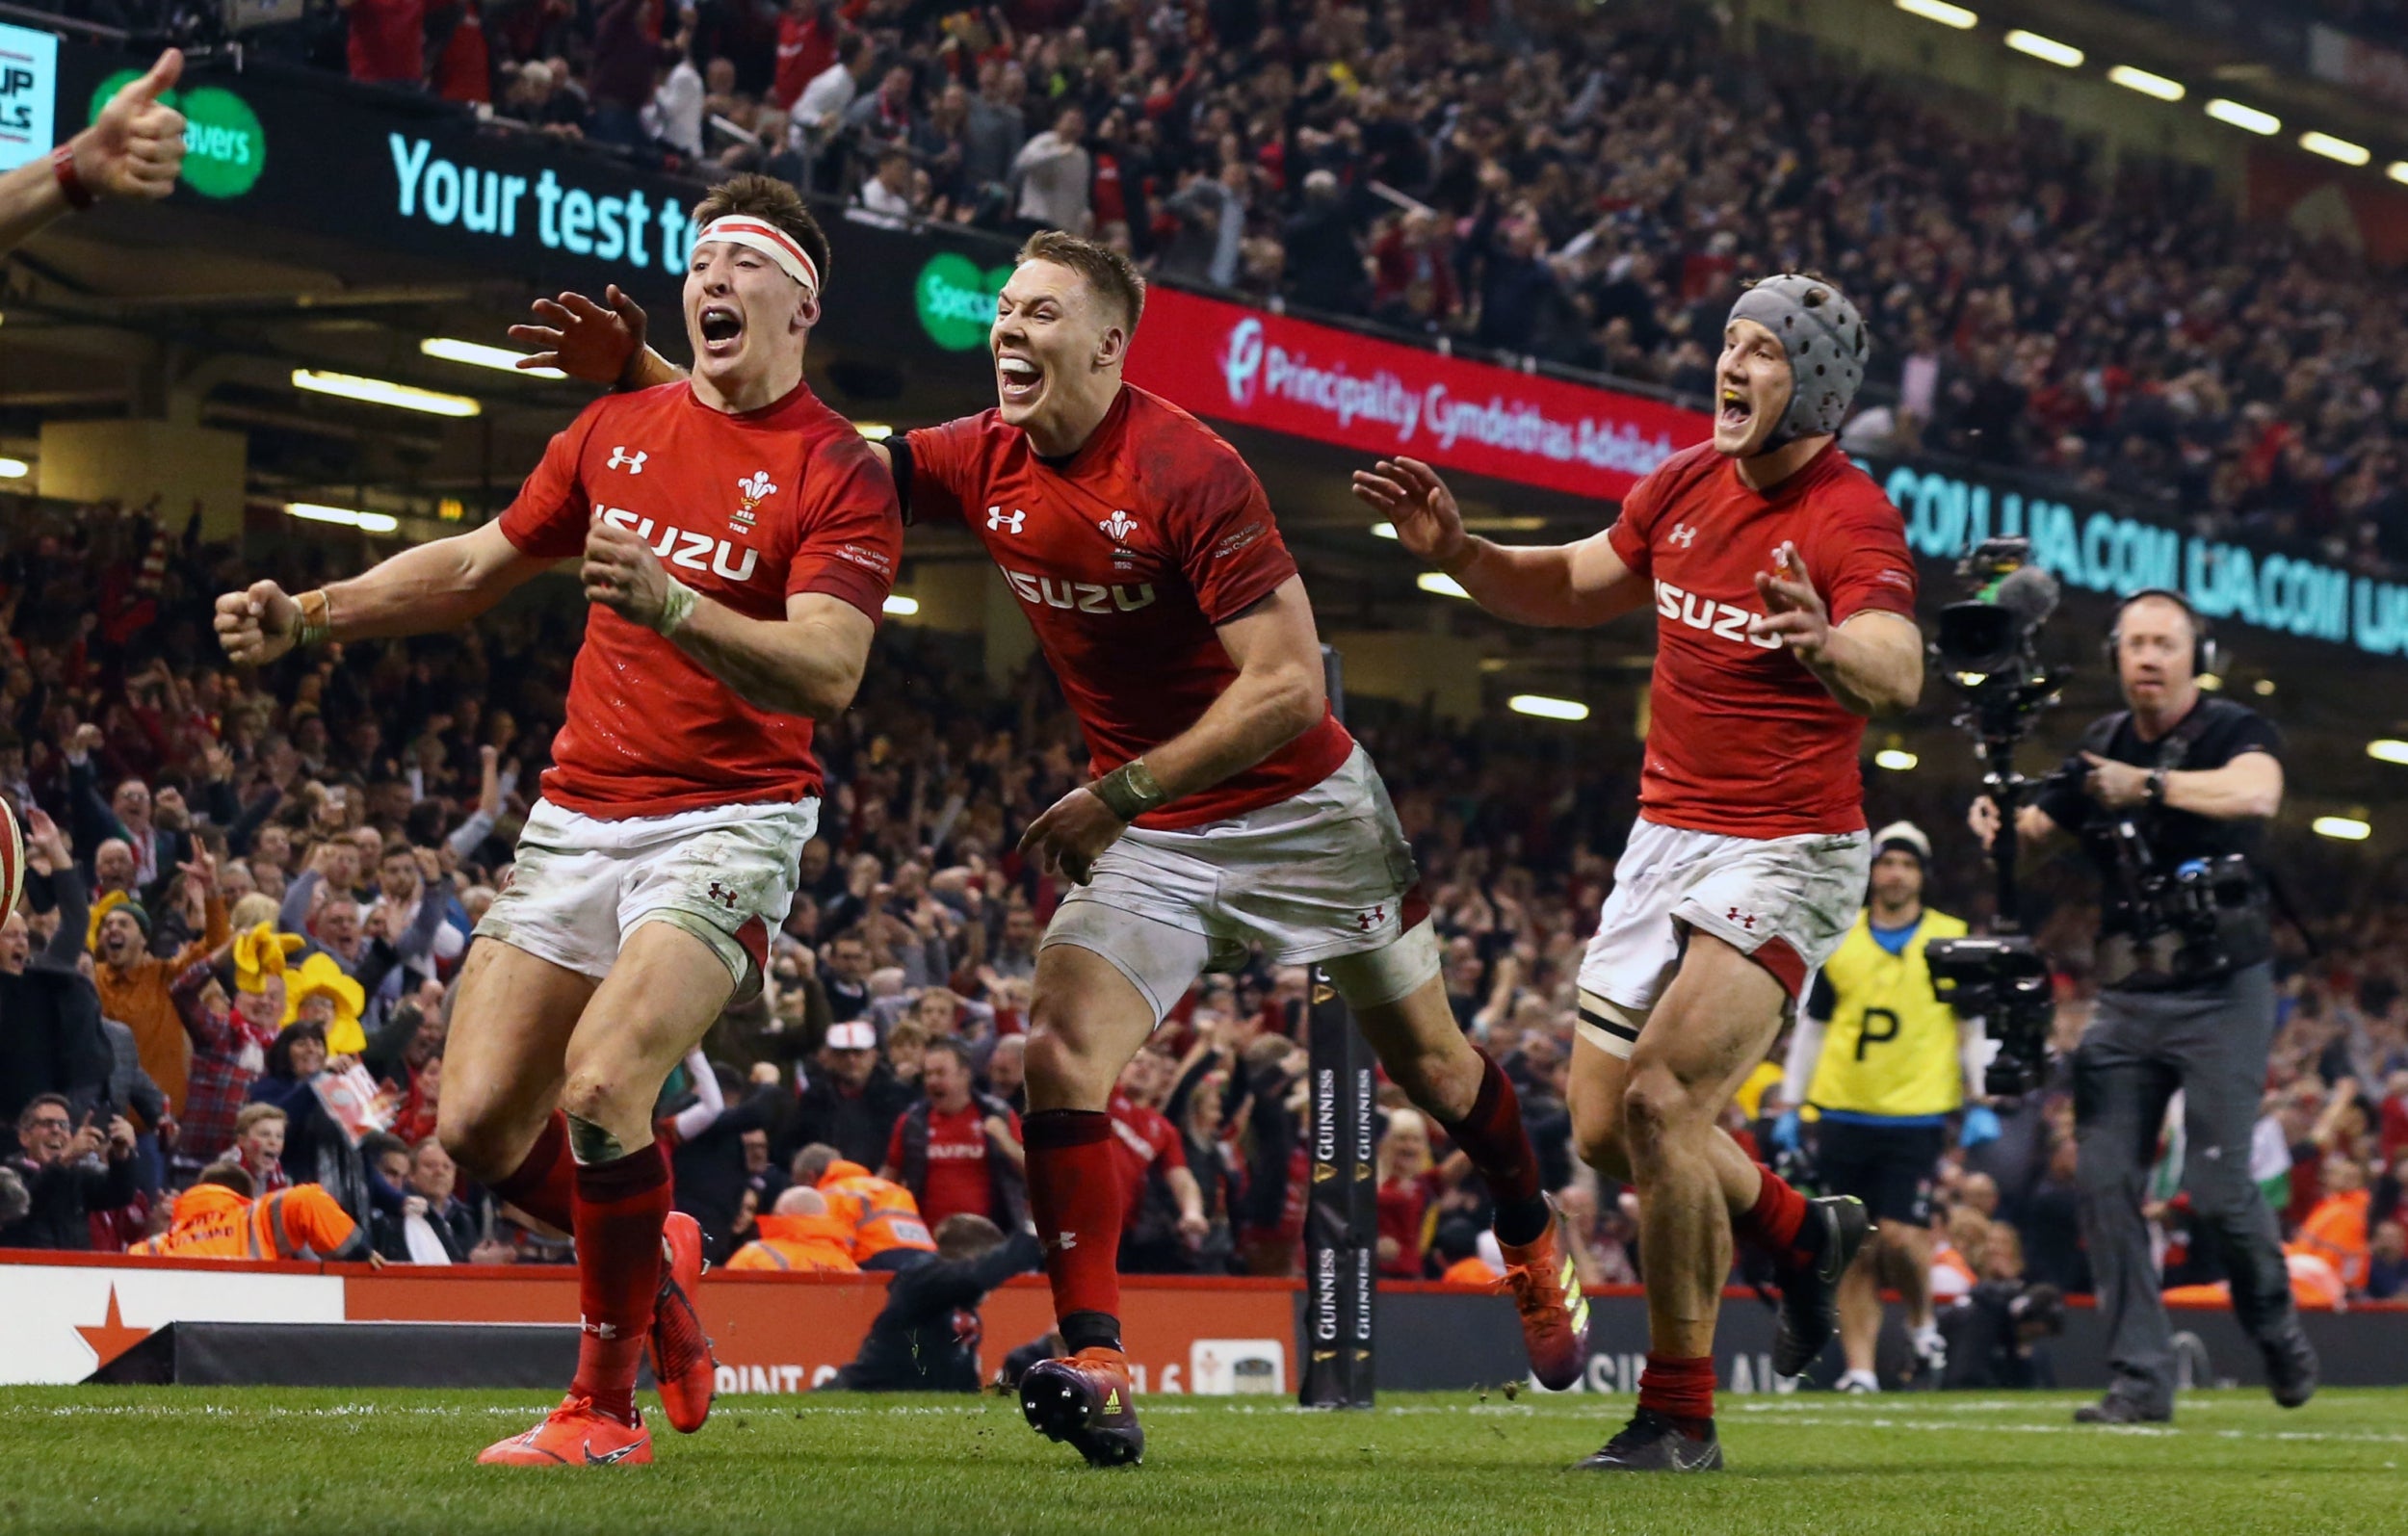 Wales vs England player ratings: Josh Adams and Liam Williams deliver